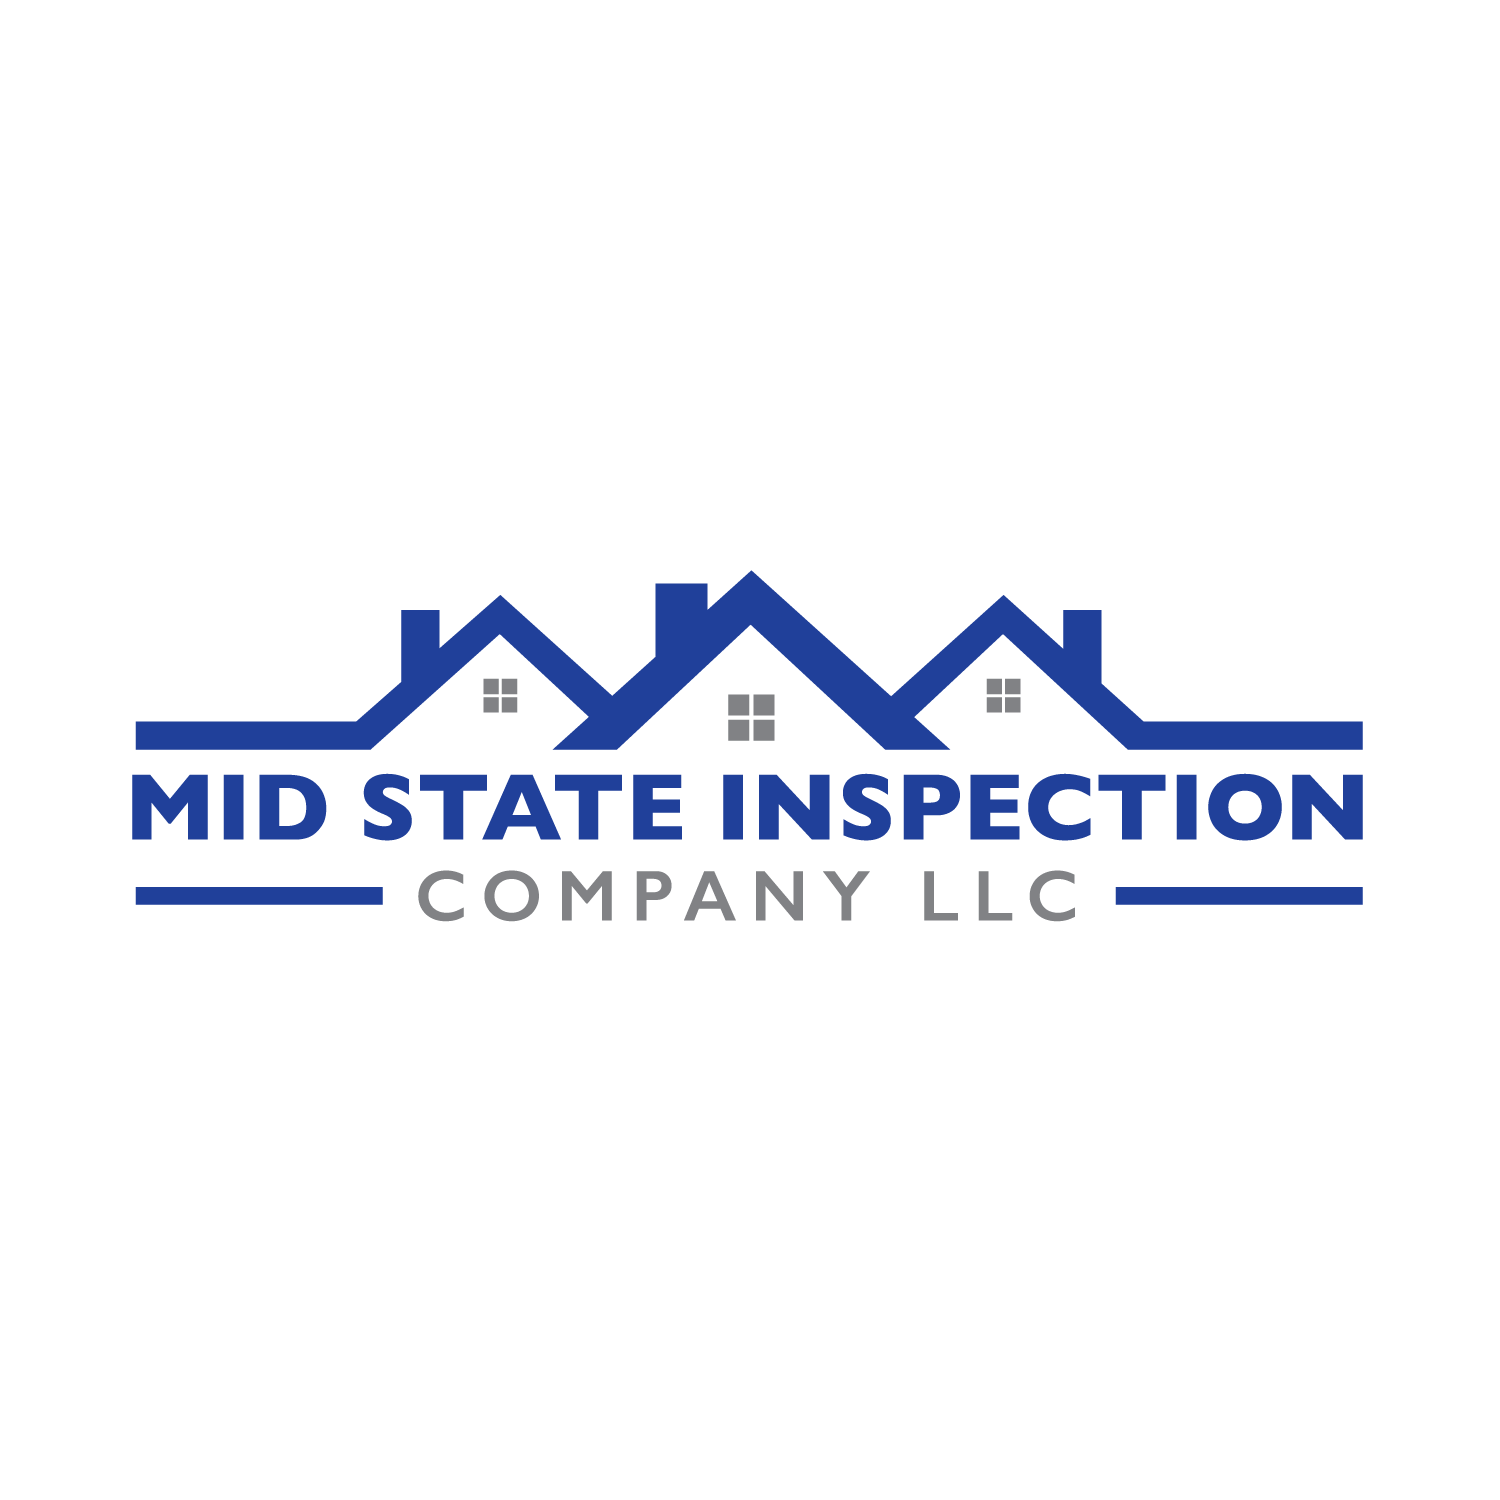 Mid State Inspection Company Logo